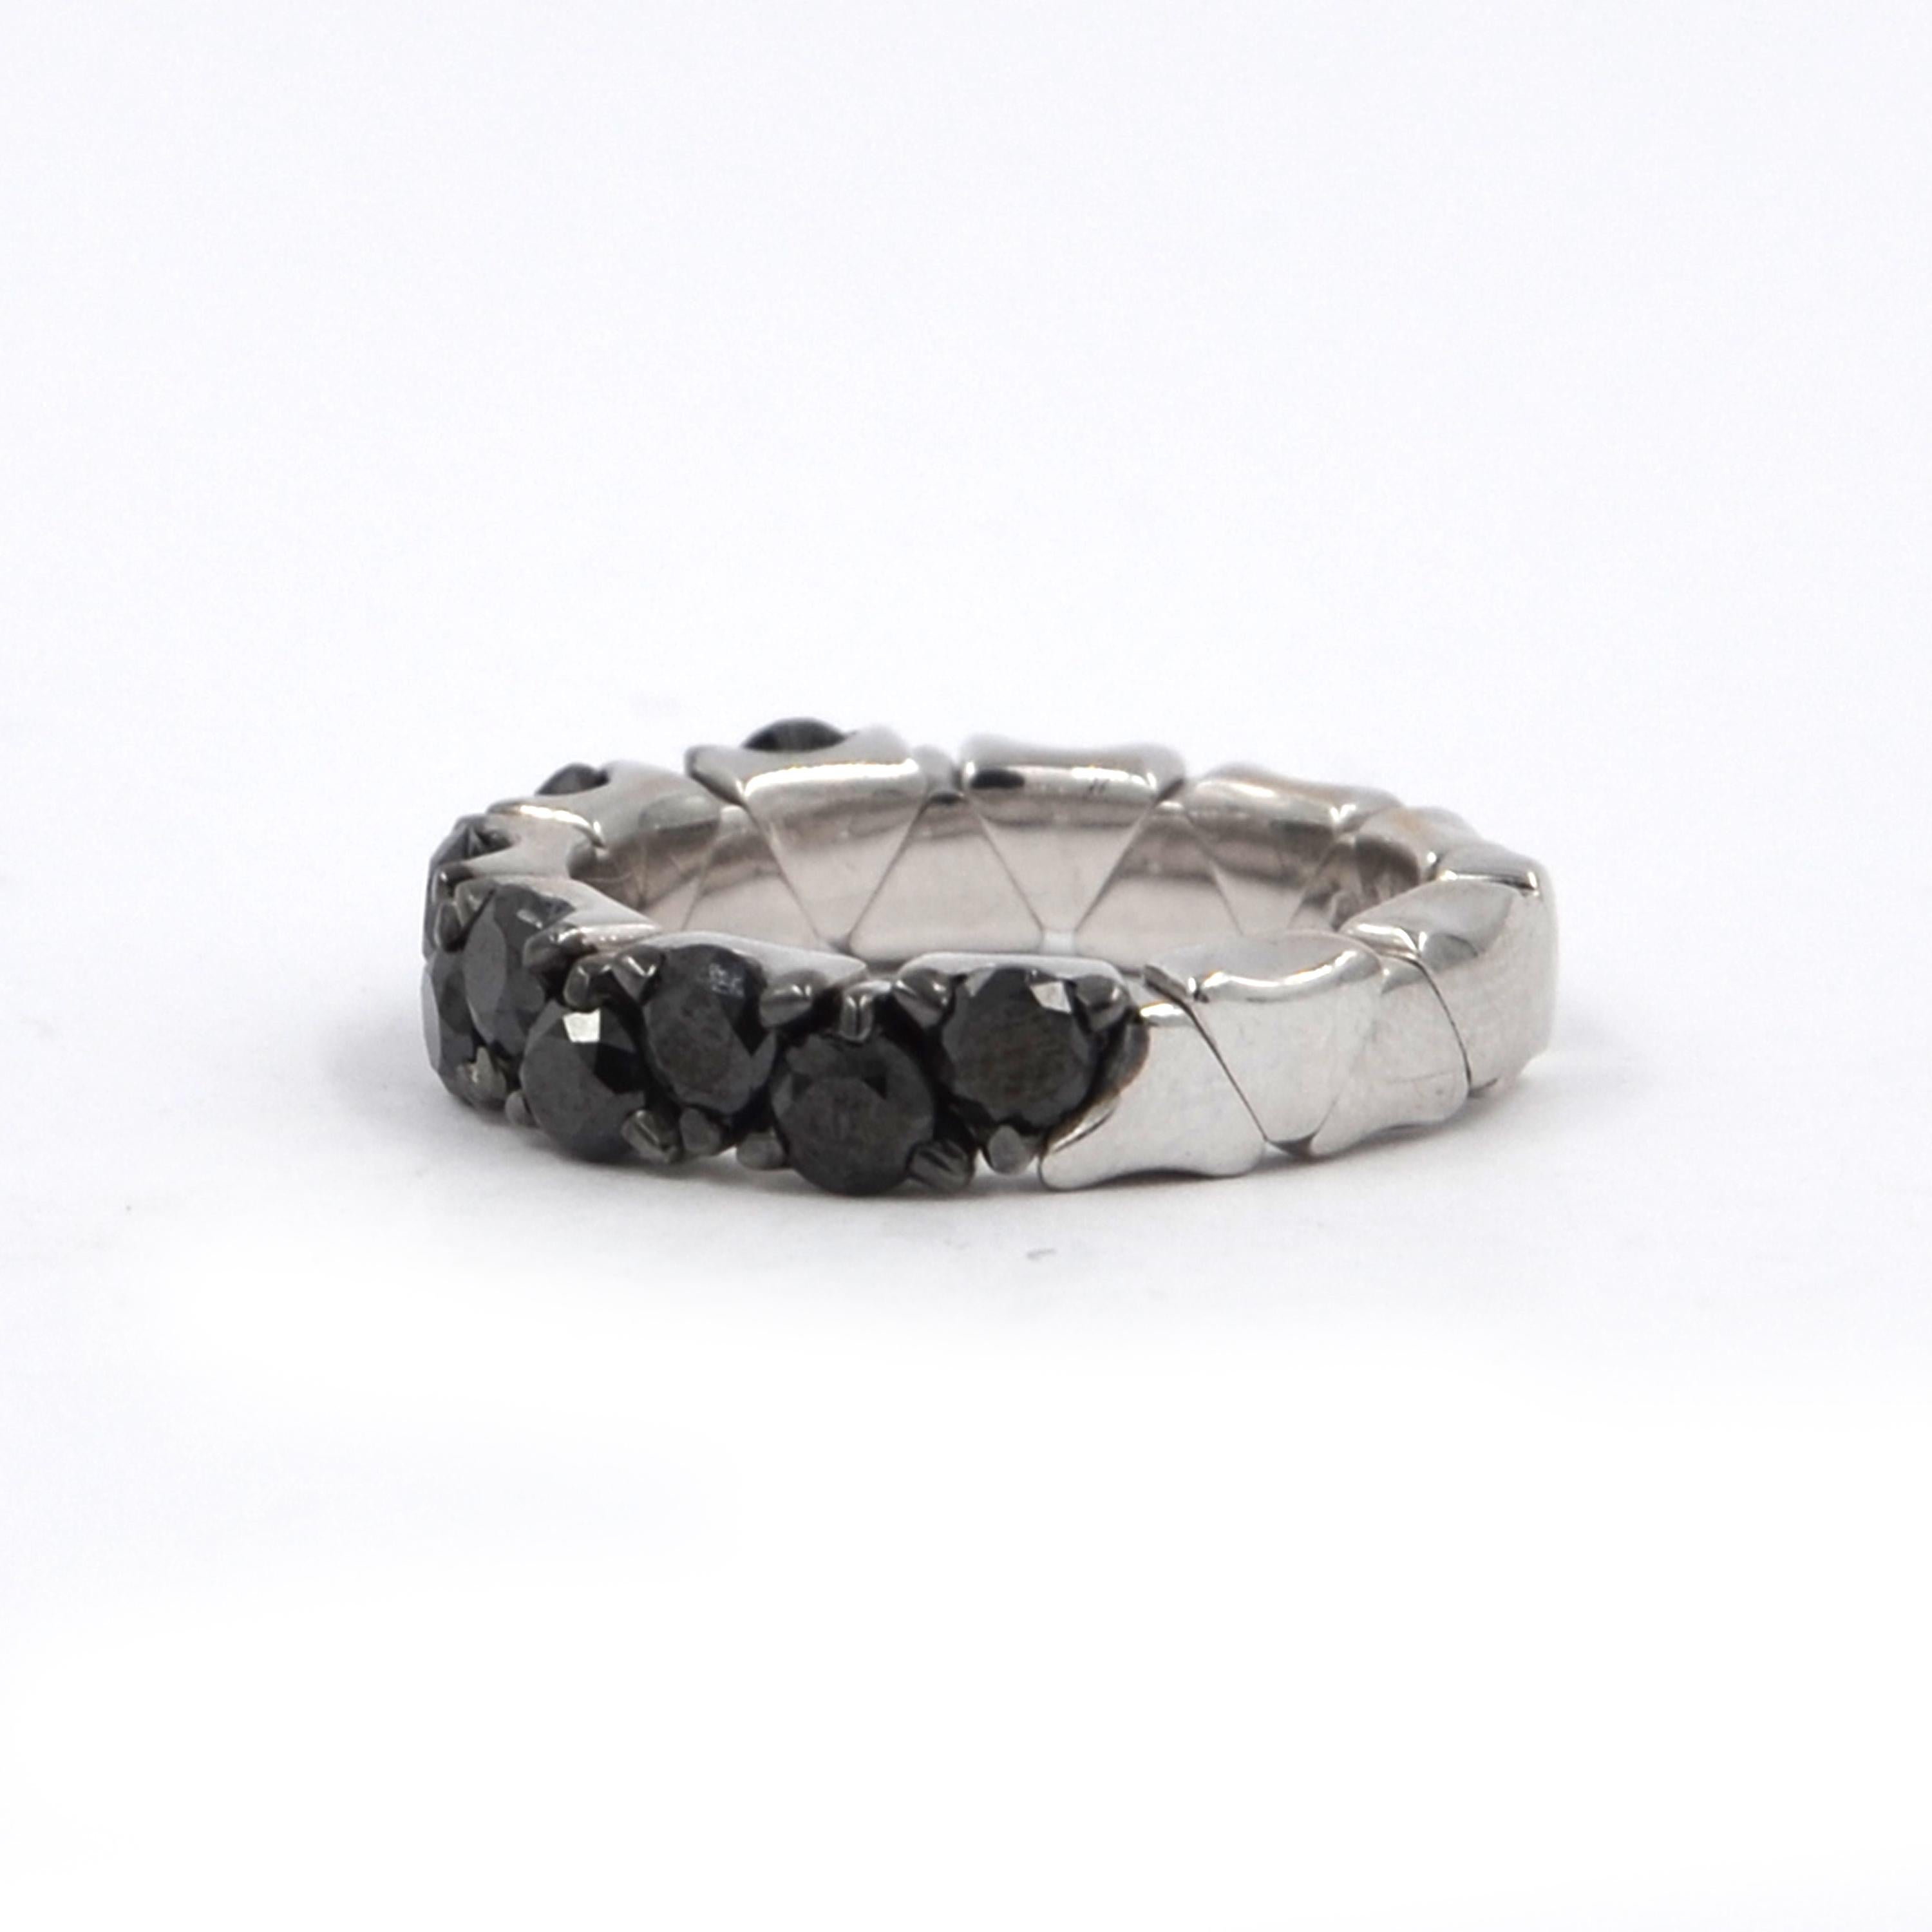 18KT White Gold Black Diamonds COIL GARAVELLI RING
For the first time on First Dib the famous Coil Garavelli Collection, one row new white gold ring with black diamonds.  
Coil inside in 18kt gold that makes the ring well suitable for a problematic